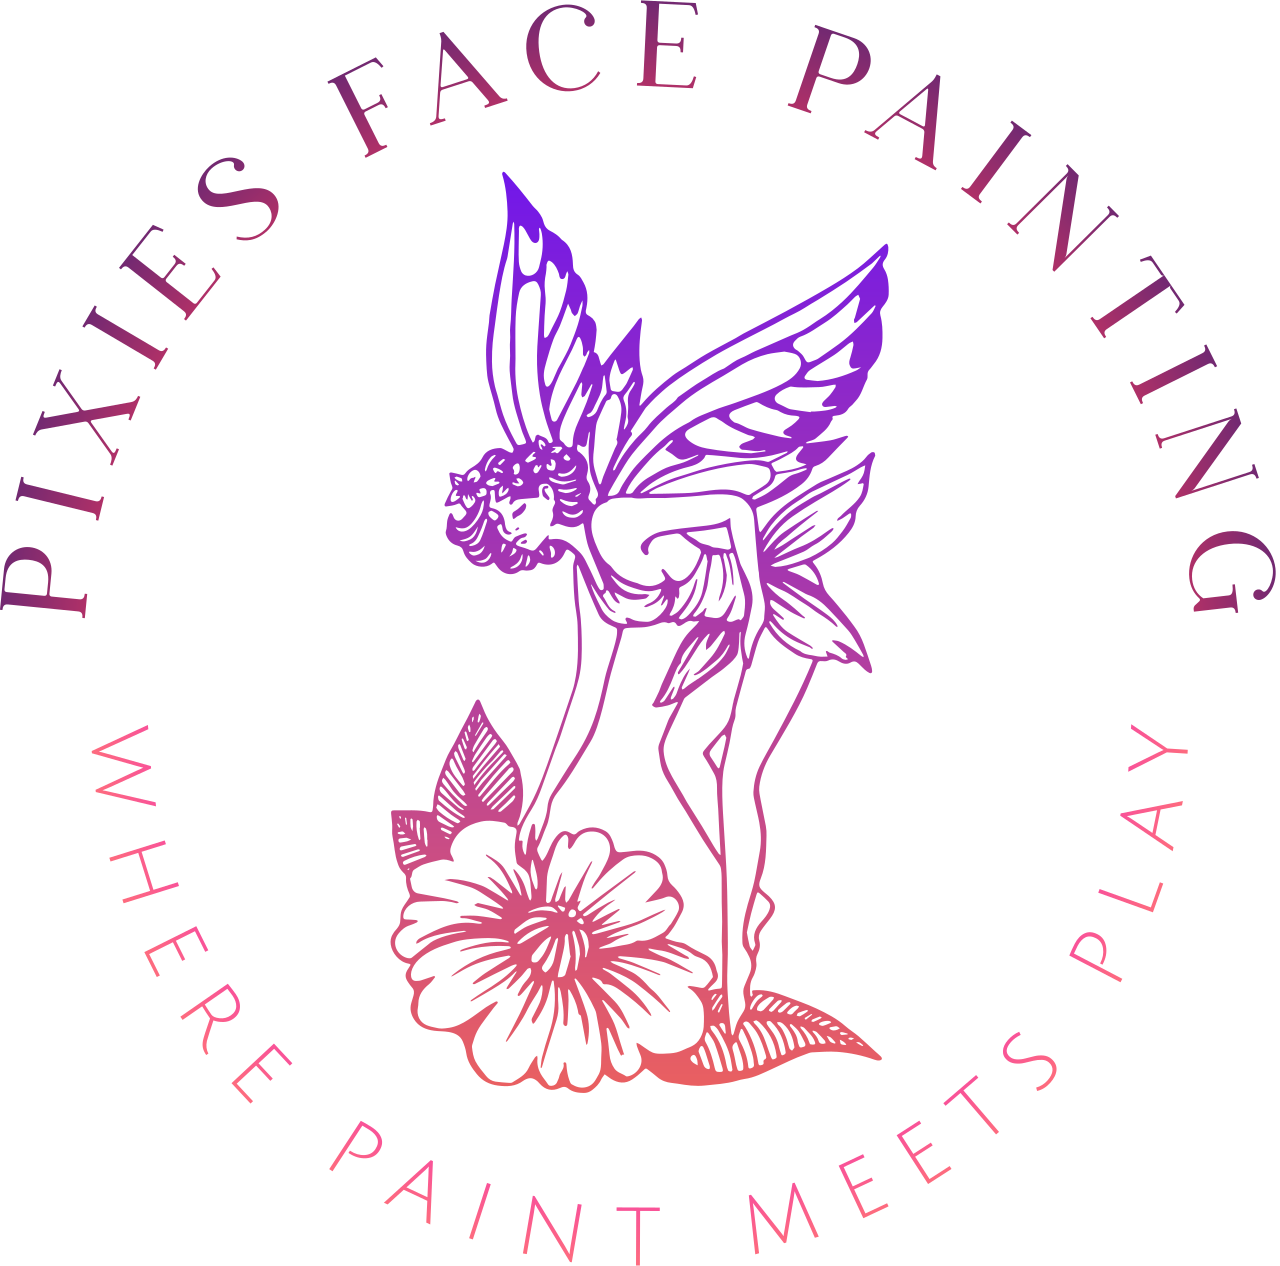 PIXIES FACE PAINTING's logo